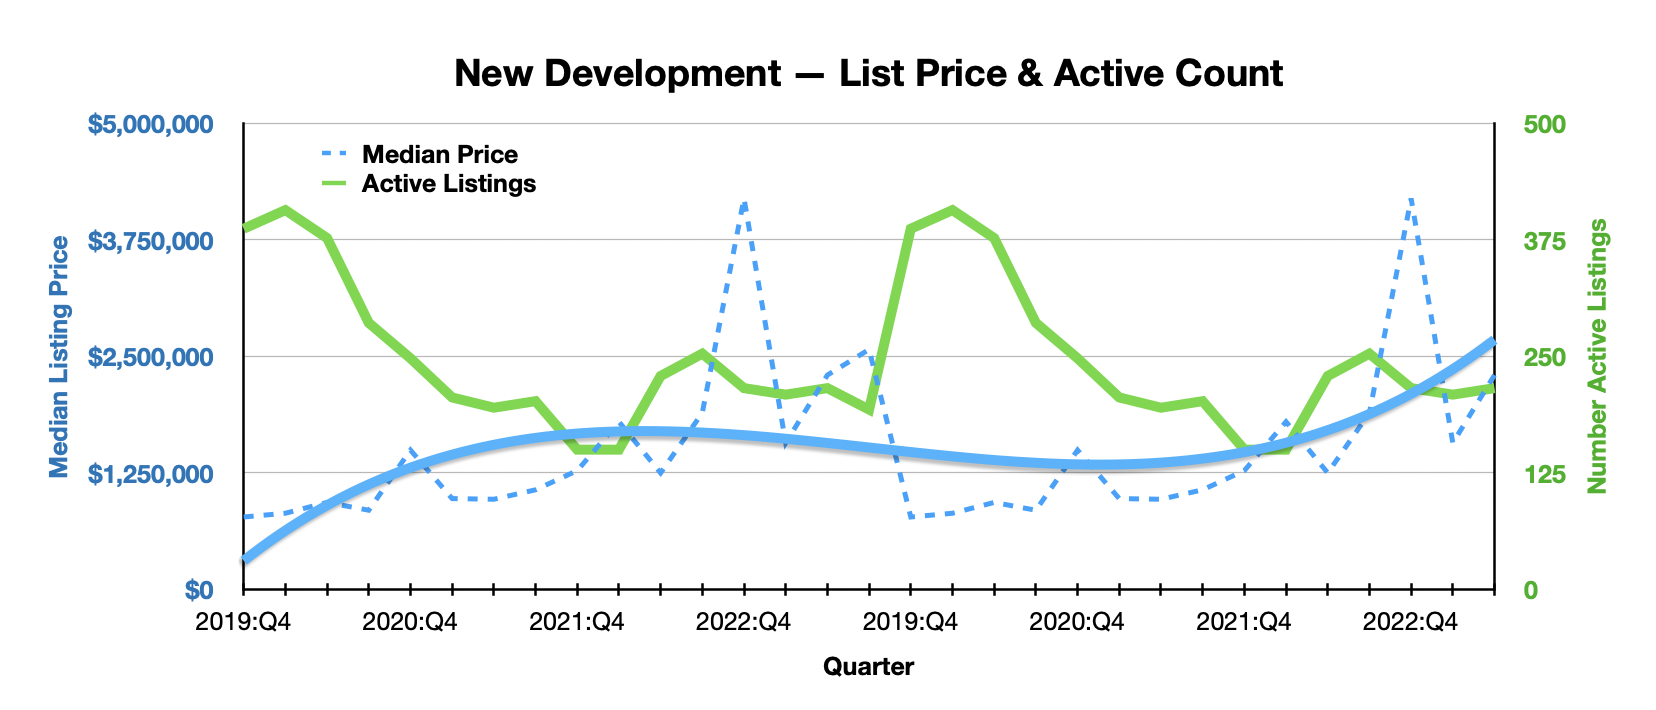 Chart show list price and number active listings by quarter over last 4 years